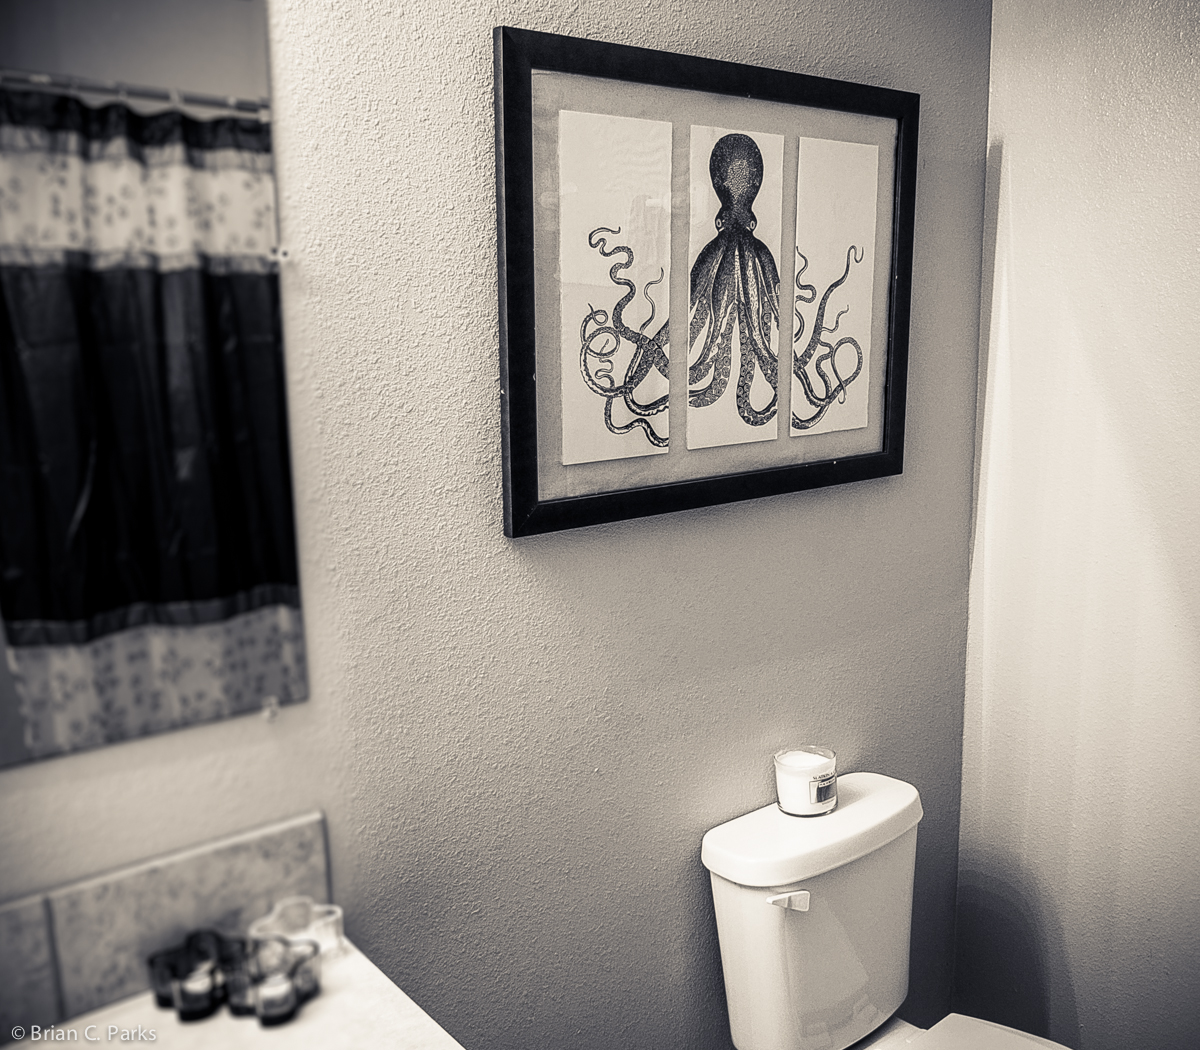 My completed Lord Bodner's octopus triptych hanging in the guest bathroom.